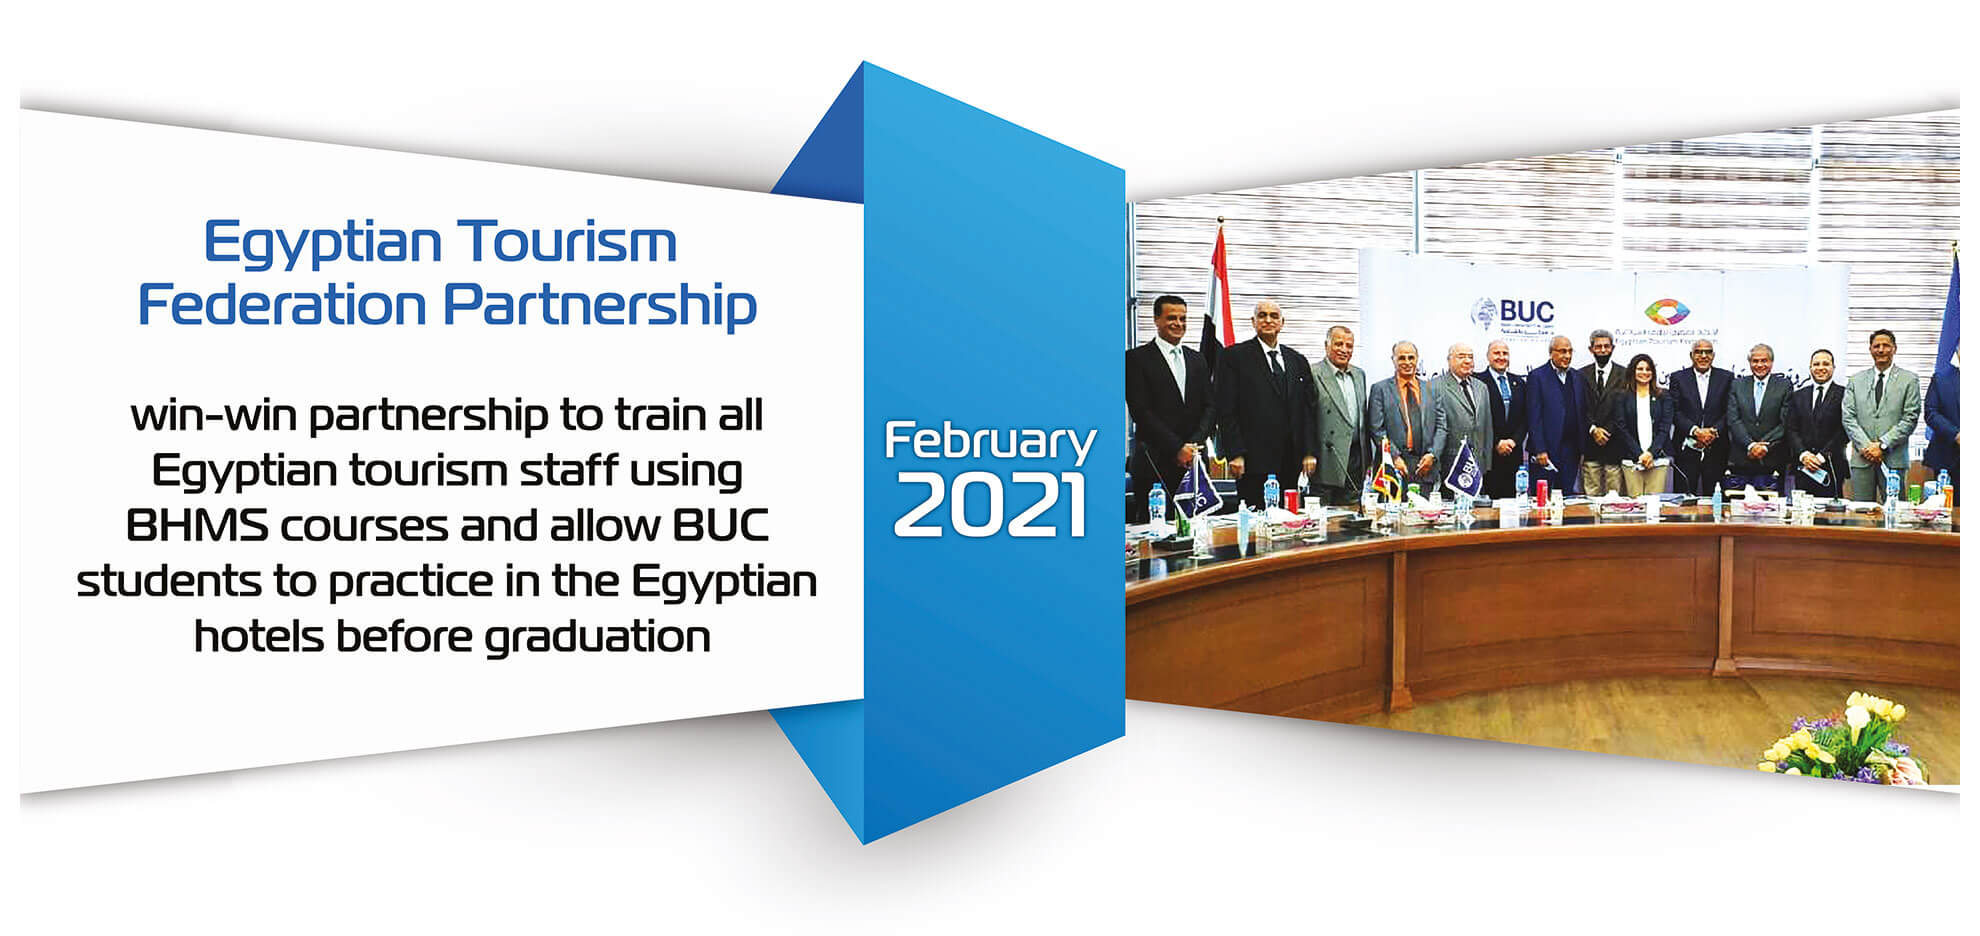 07_tourism-fedration-BUC-Stakeholder-Relations-Center